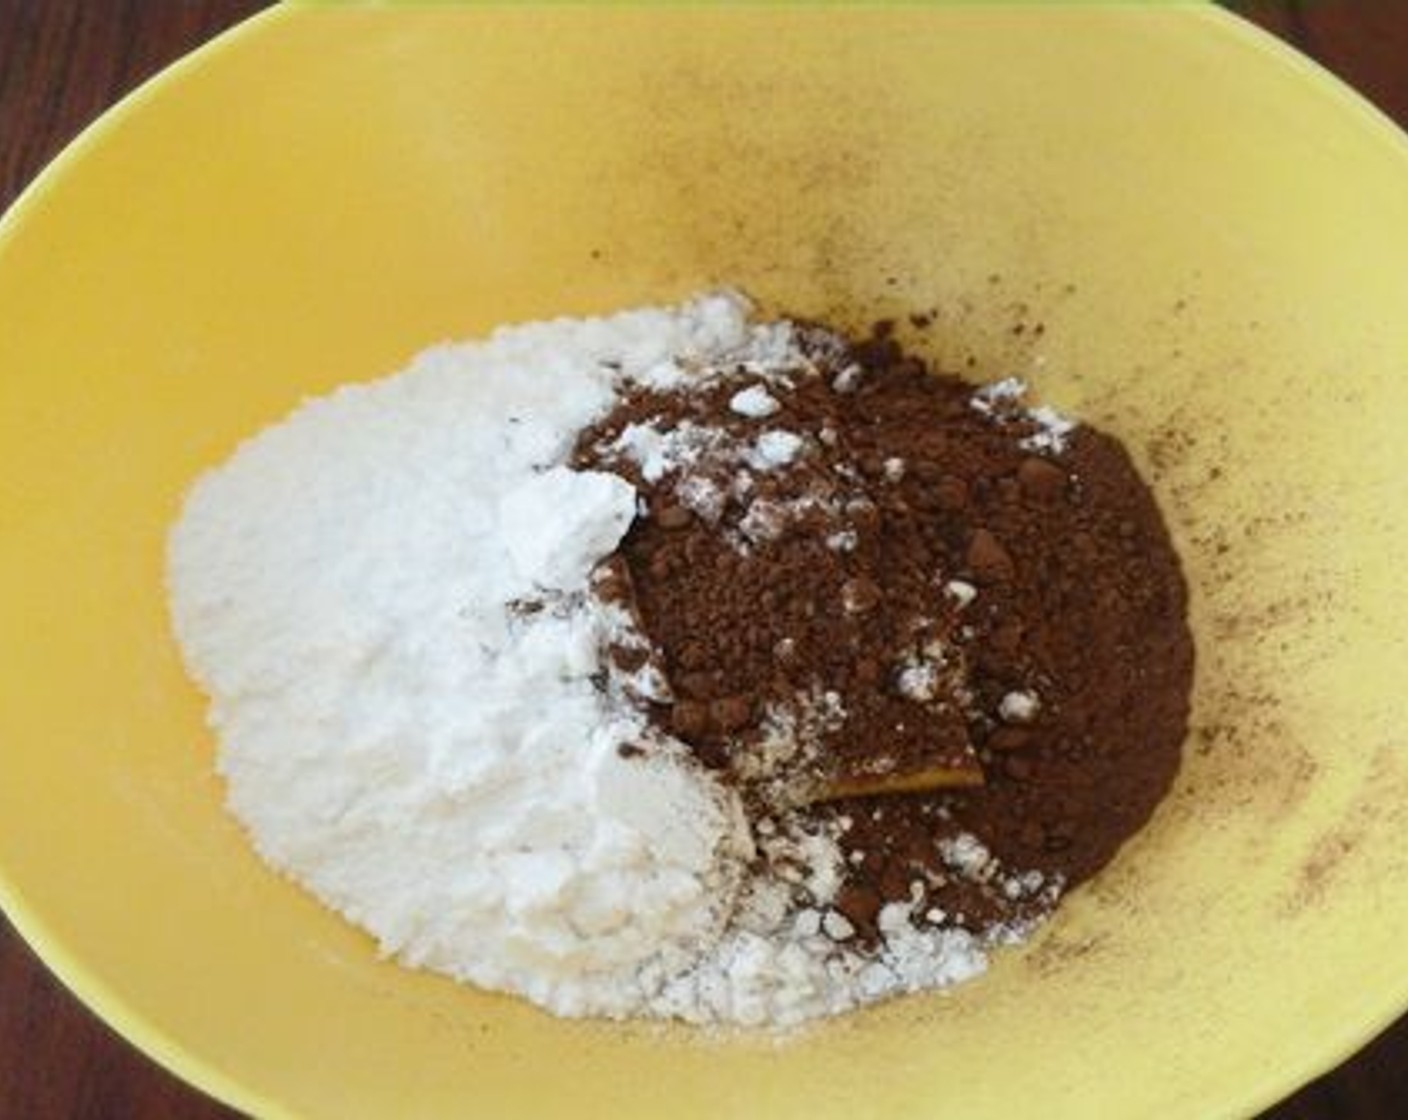 step 7 For the cream filling combine Butter (2 Tbsp), Powdered Confectioners Sugar (1/2 cup), Unsweetened Cocoa Powder (1/2 Tbsp), and Milk (1/2 tsp)